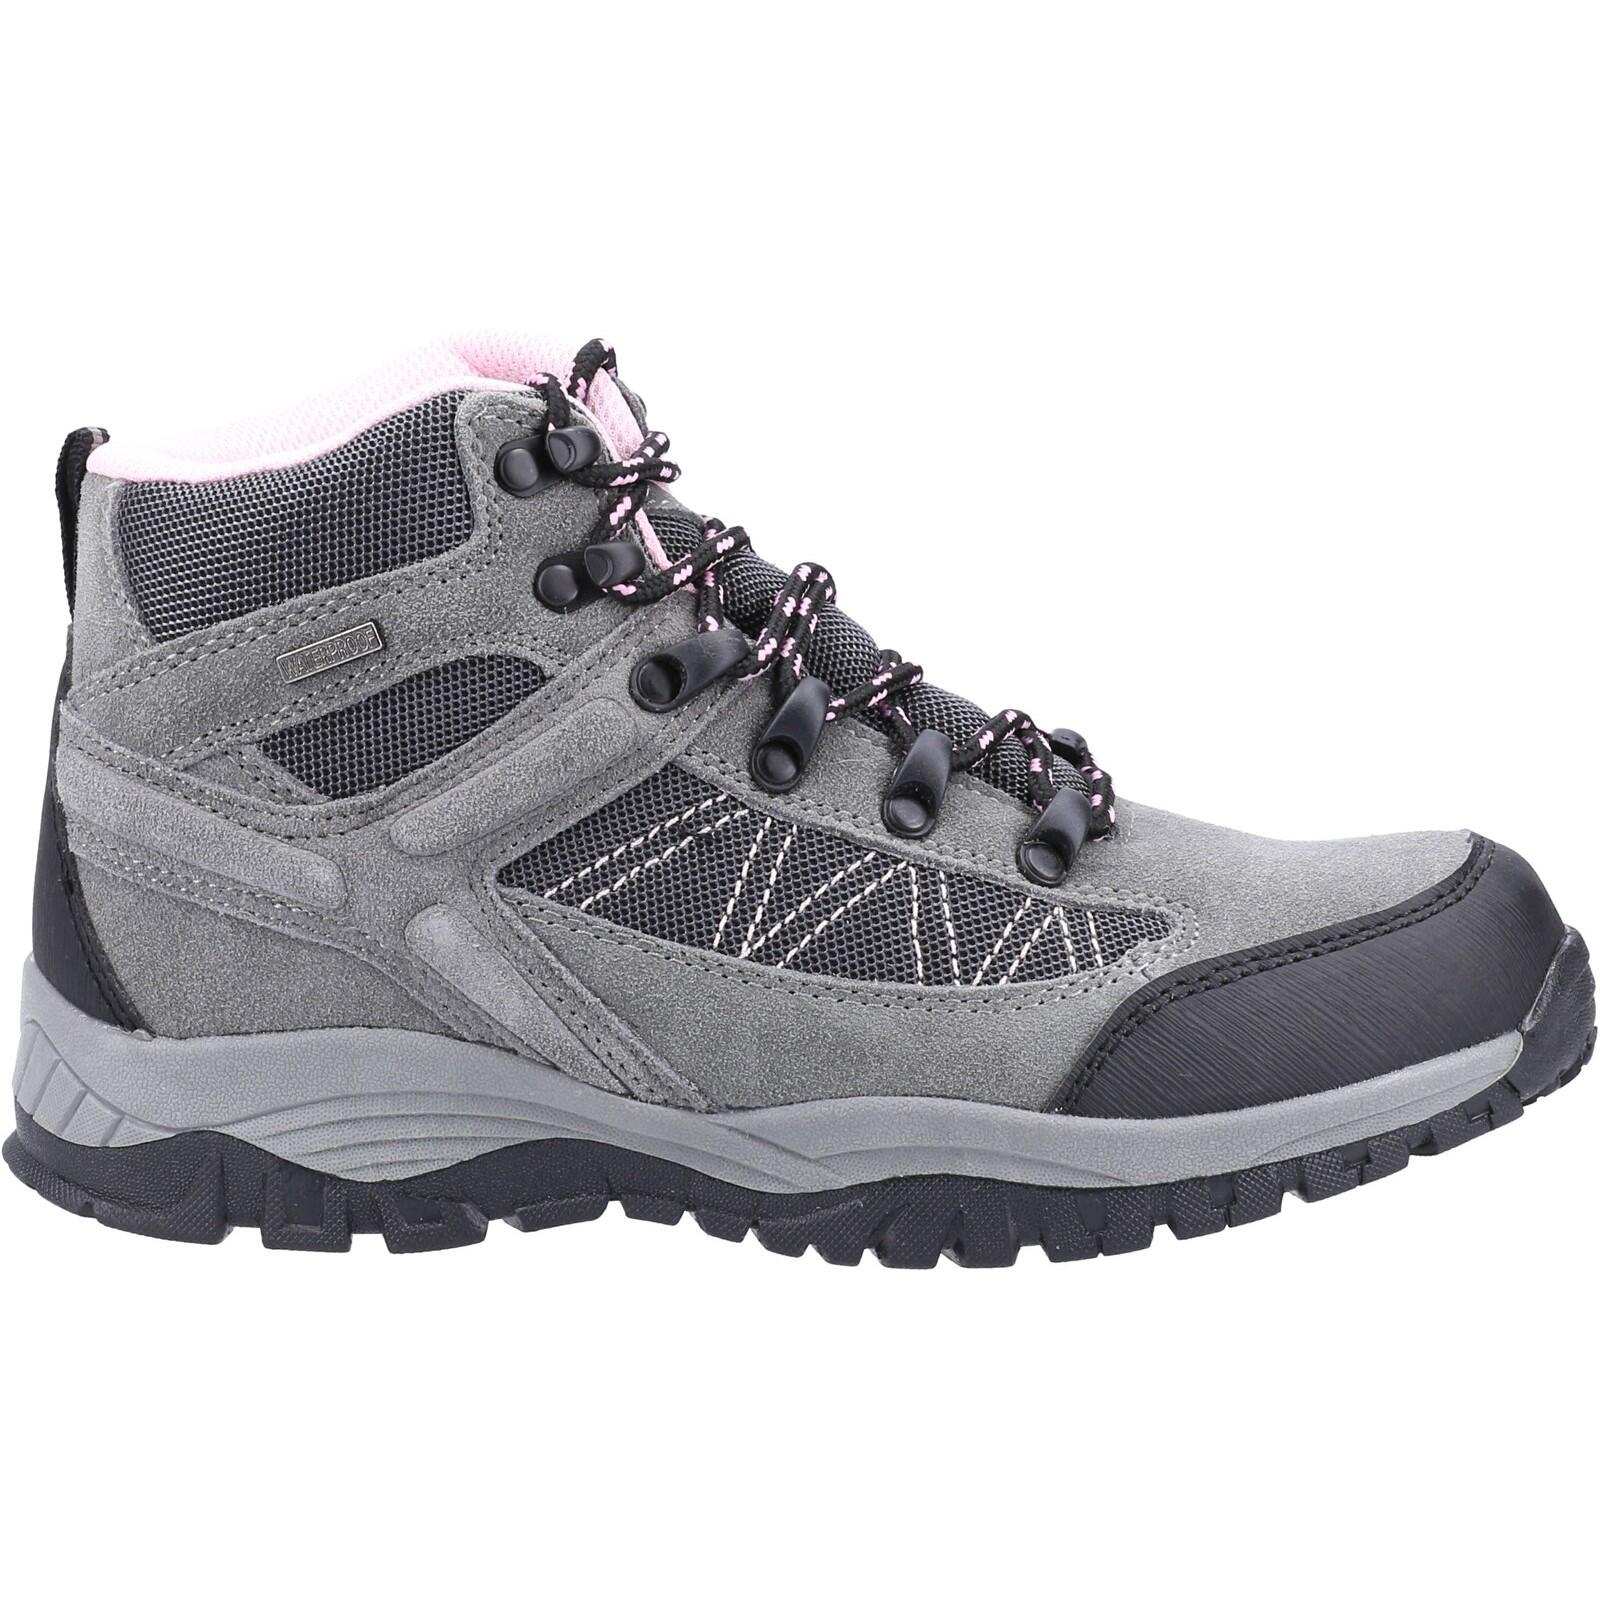 COTSWOLD Maisemore Ladies Ladies Hiking Boots GREY